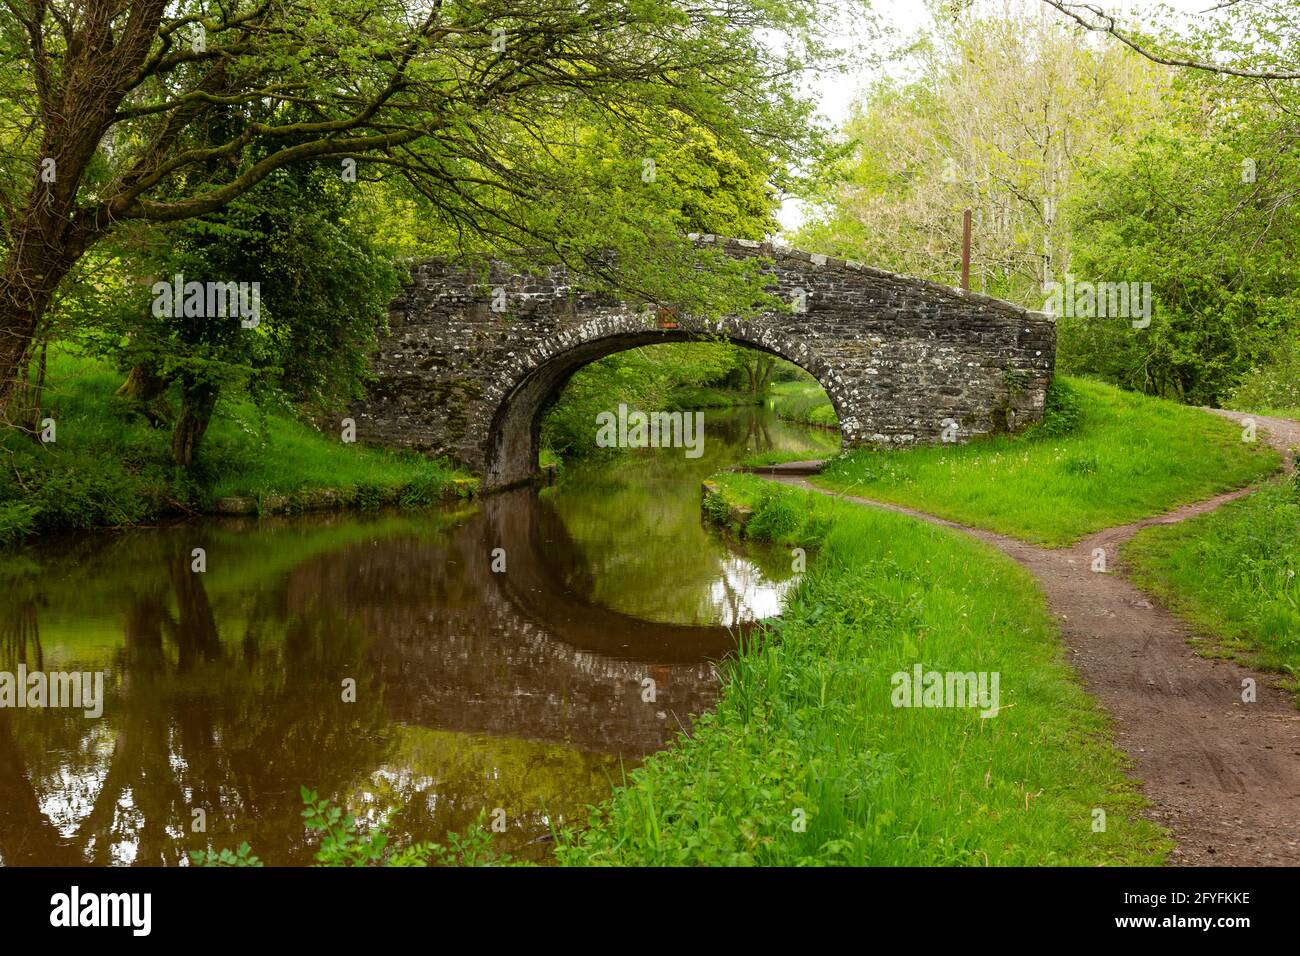 Bridge 151, Monmouthshire and Brecon Canal, Powys, Wales, UK Stock Photo